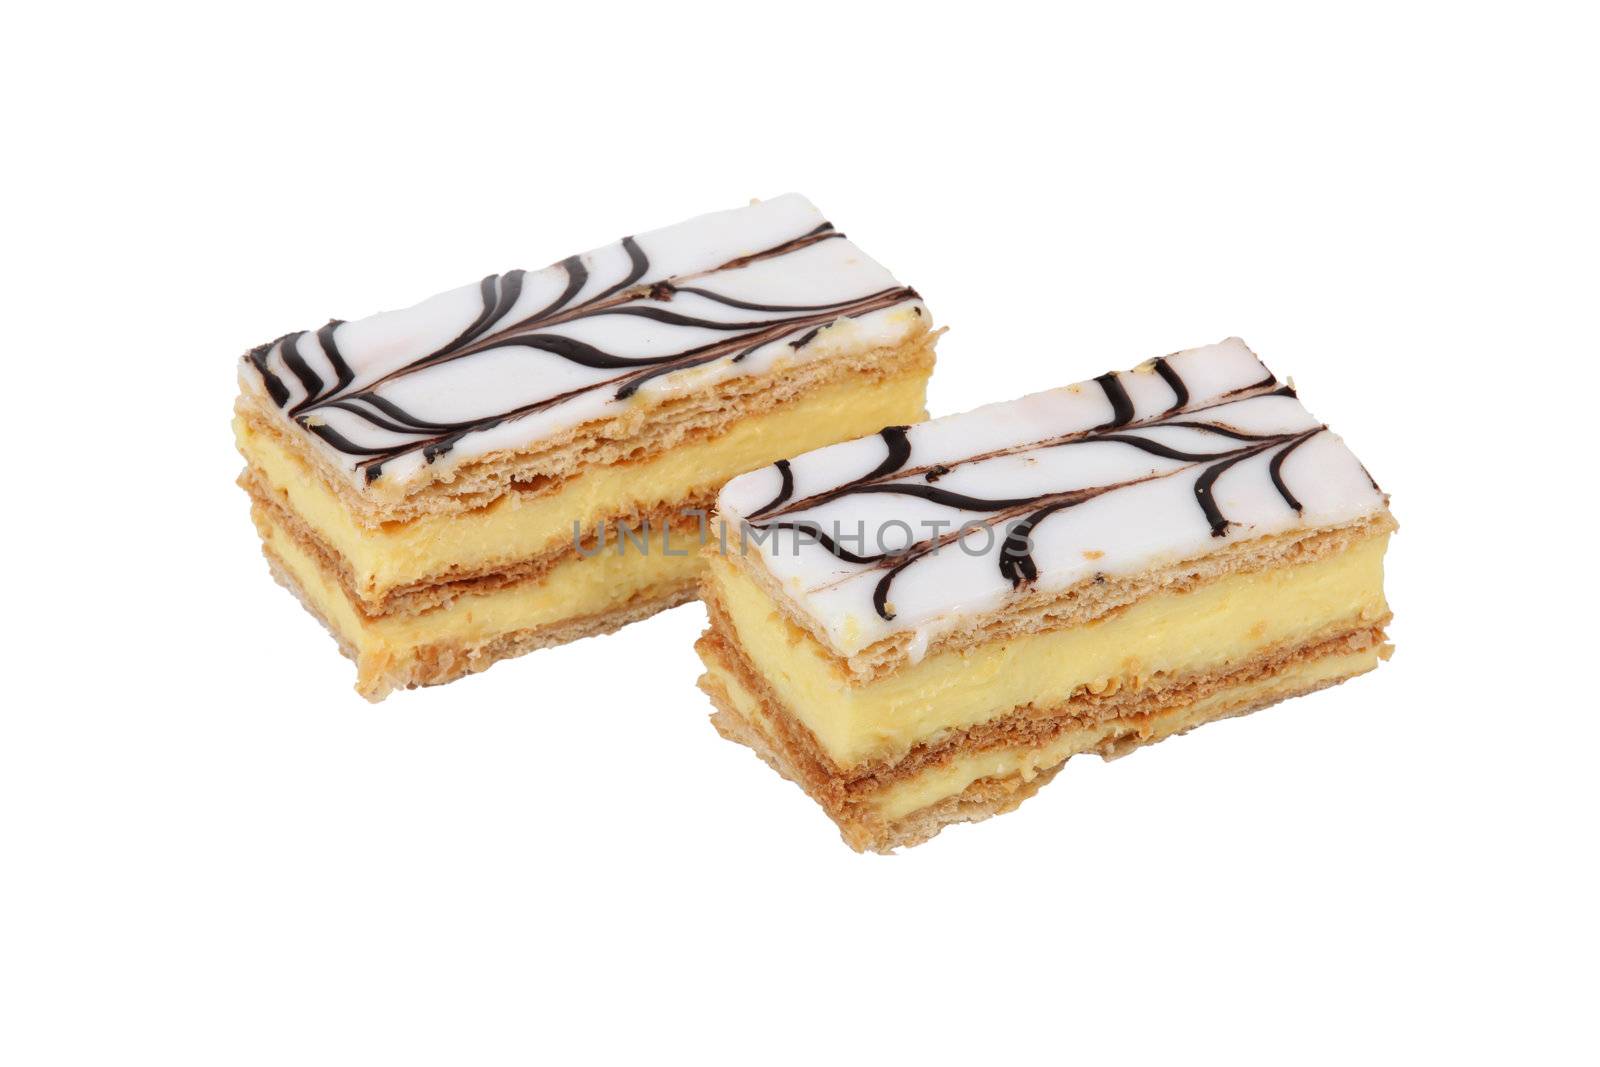 Two mille-feuille pastries